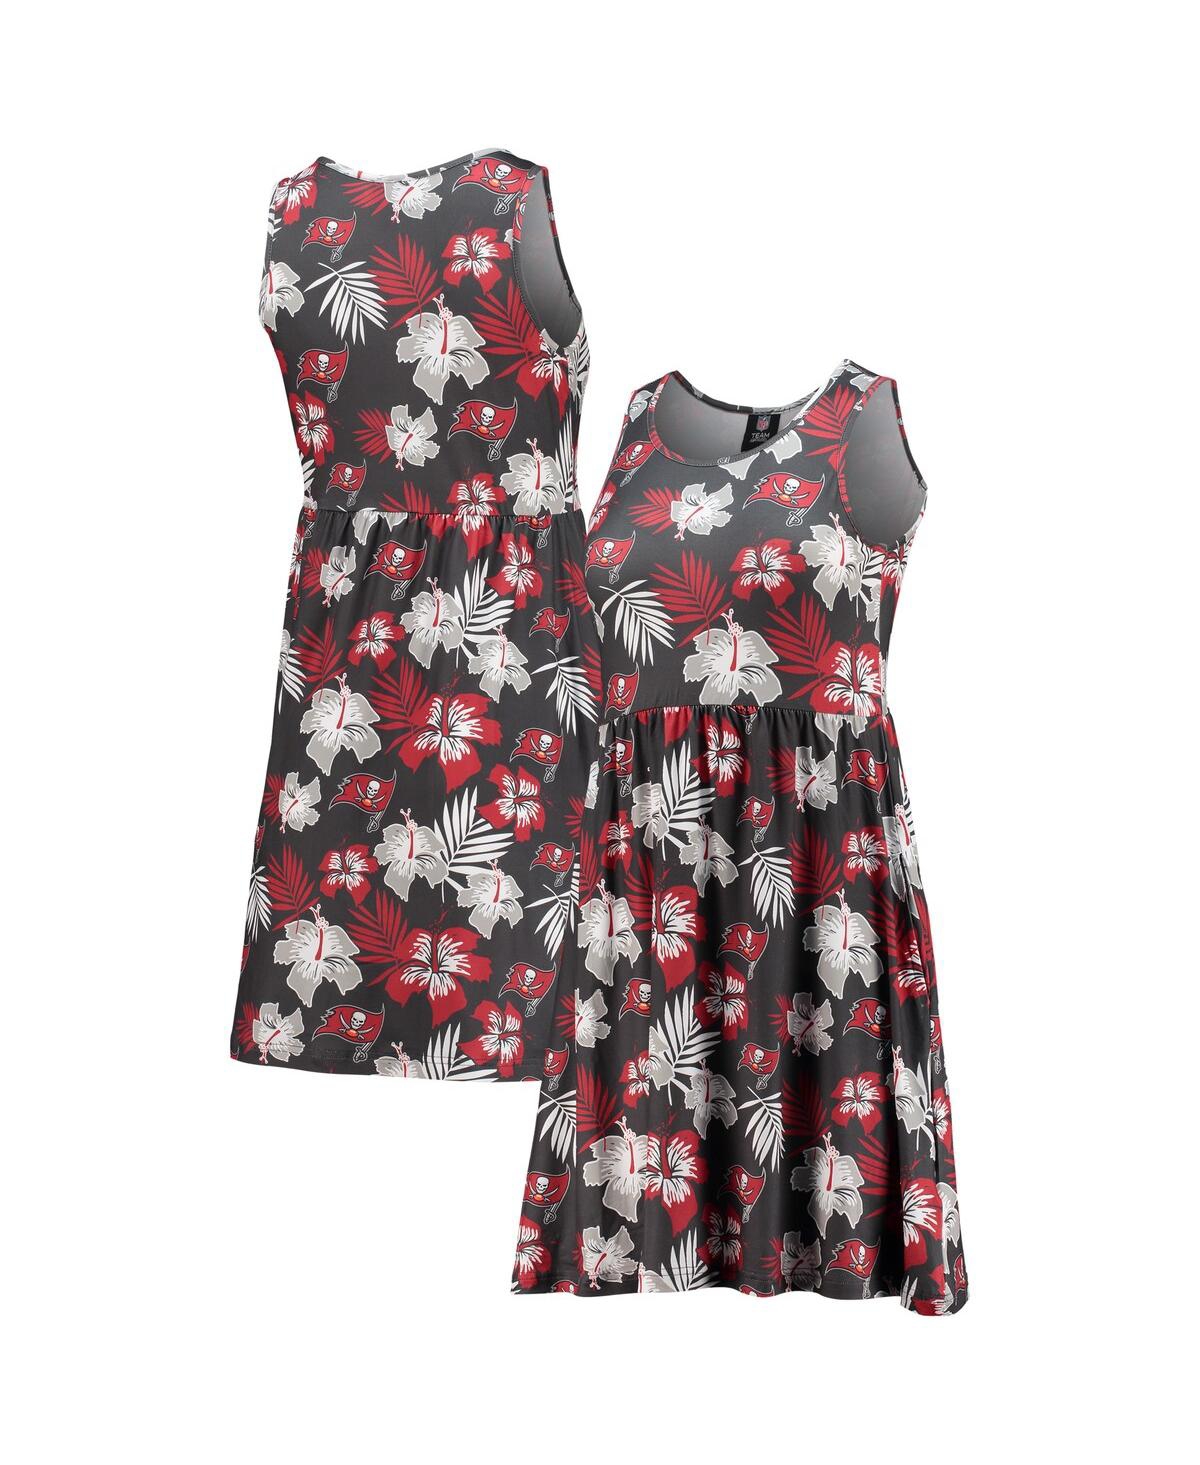 Women's Foco Red Tampa Bay Buccaneers Floral Sundress - Red